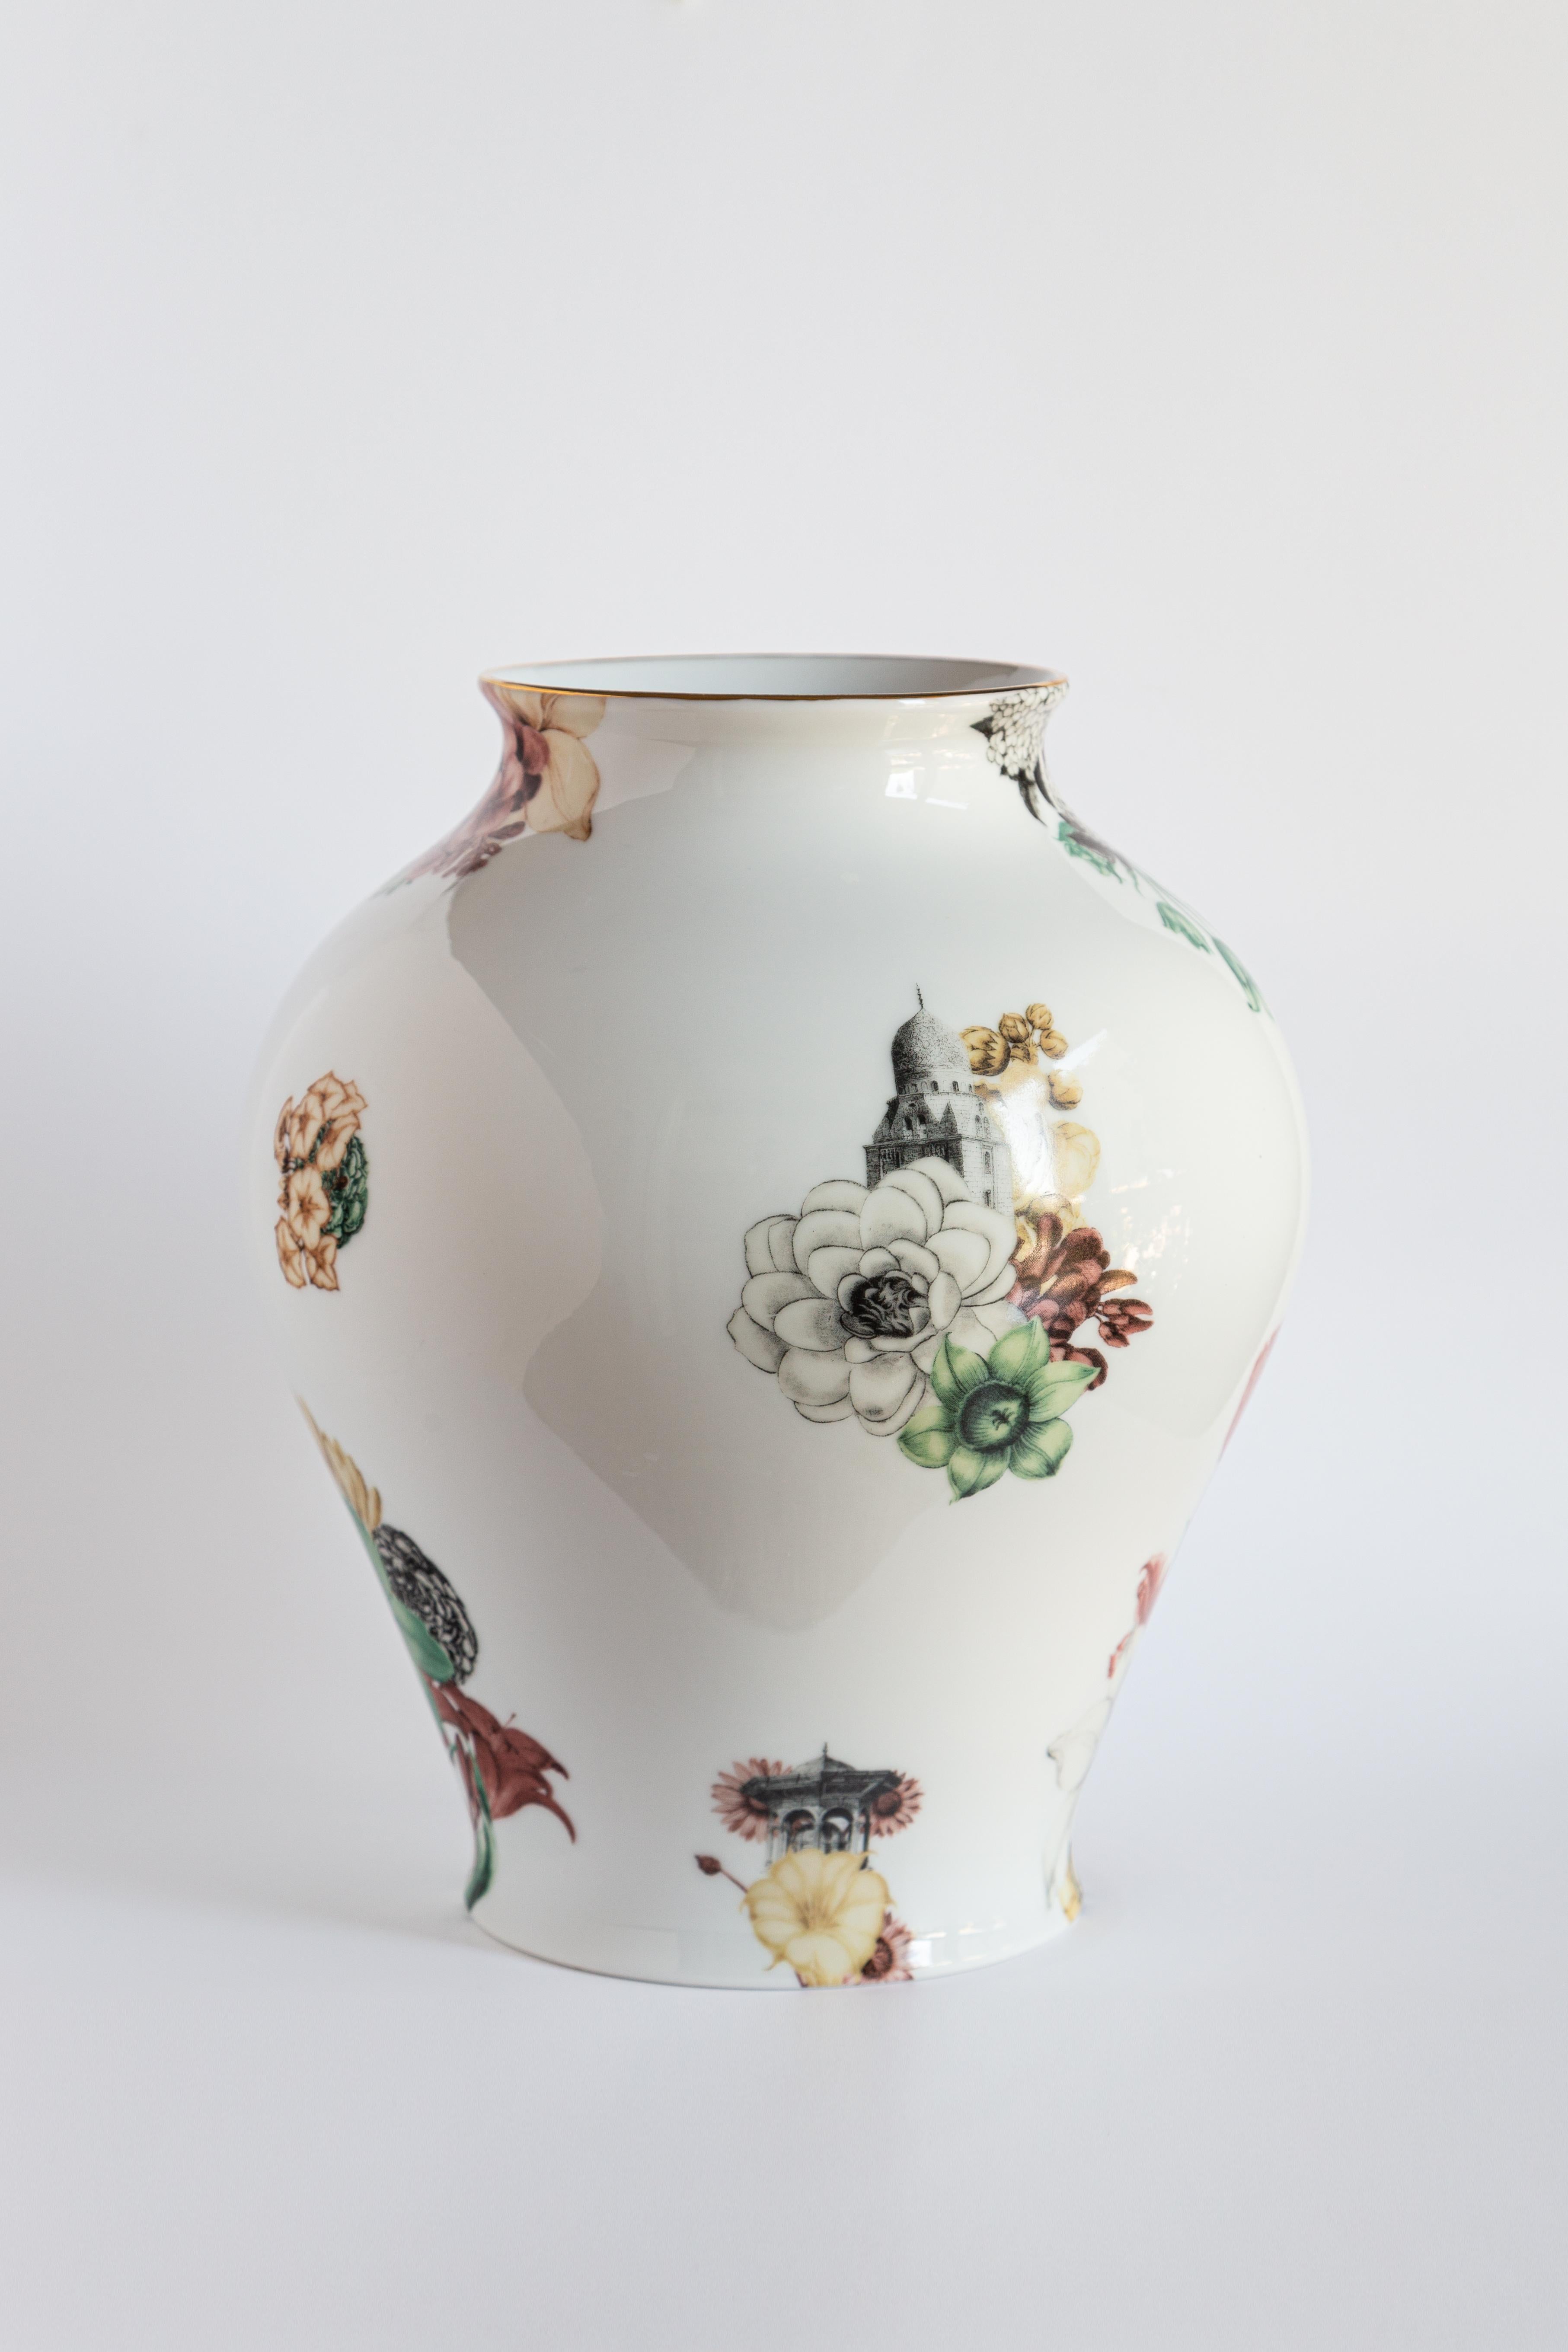 The Classic design of this porcelain vase comes back to life with retro decorations with a contemporary flavor. Flowers and Middle Eastern architectures fits together in this dreamy design.